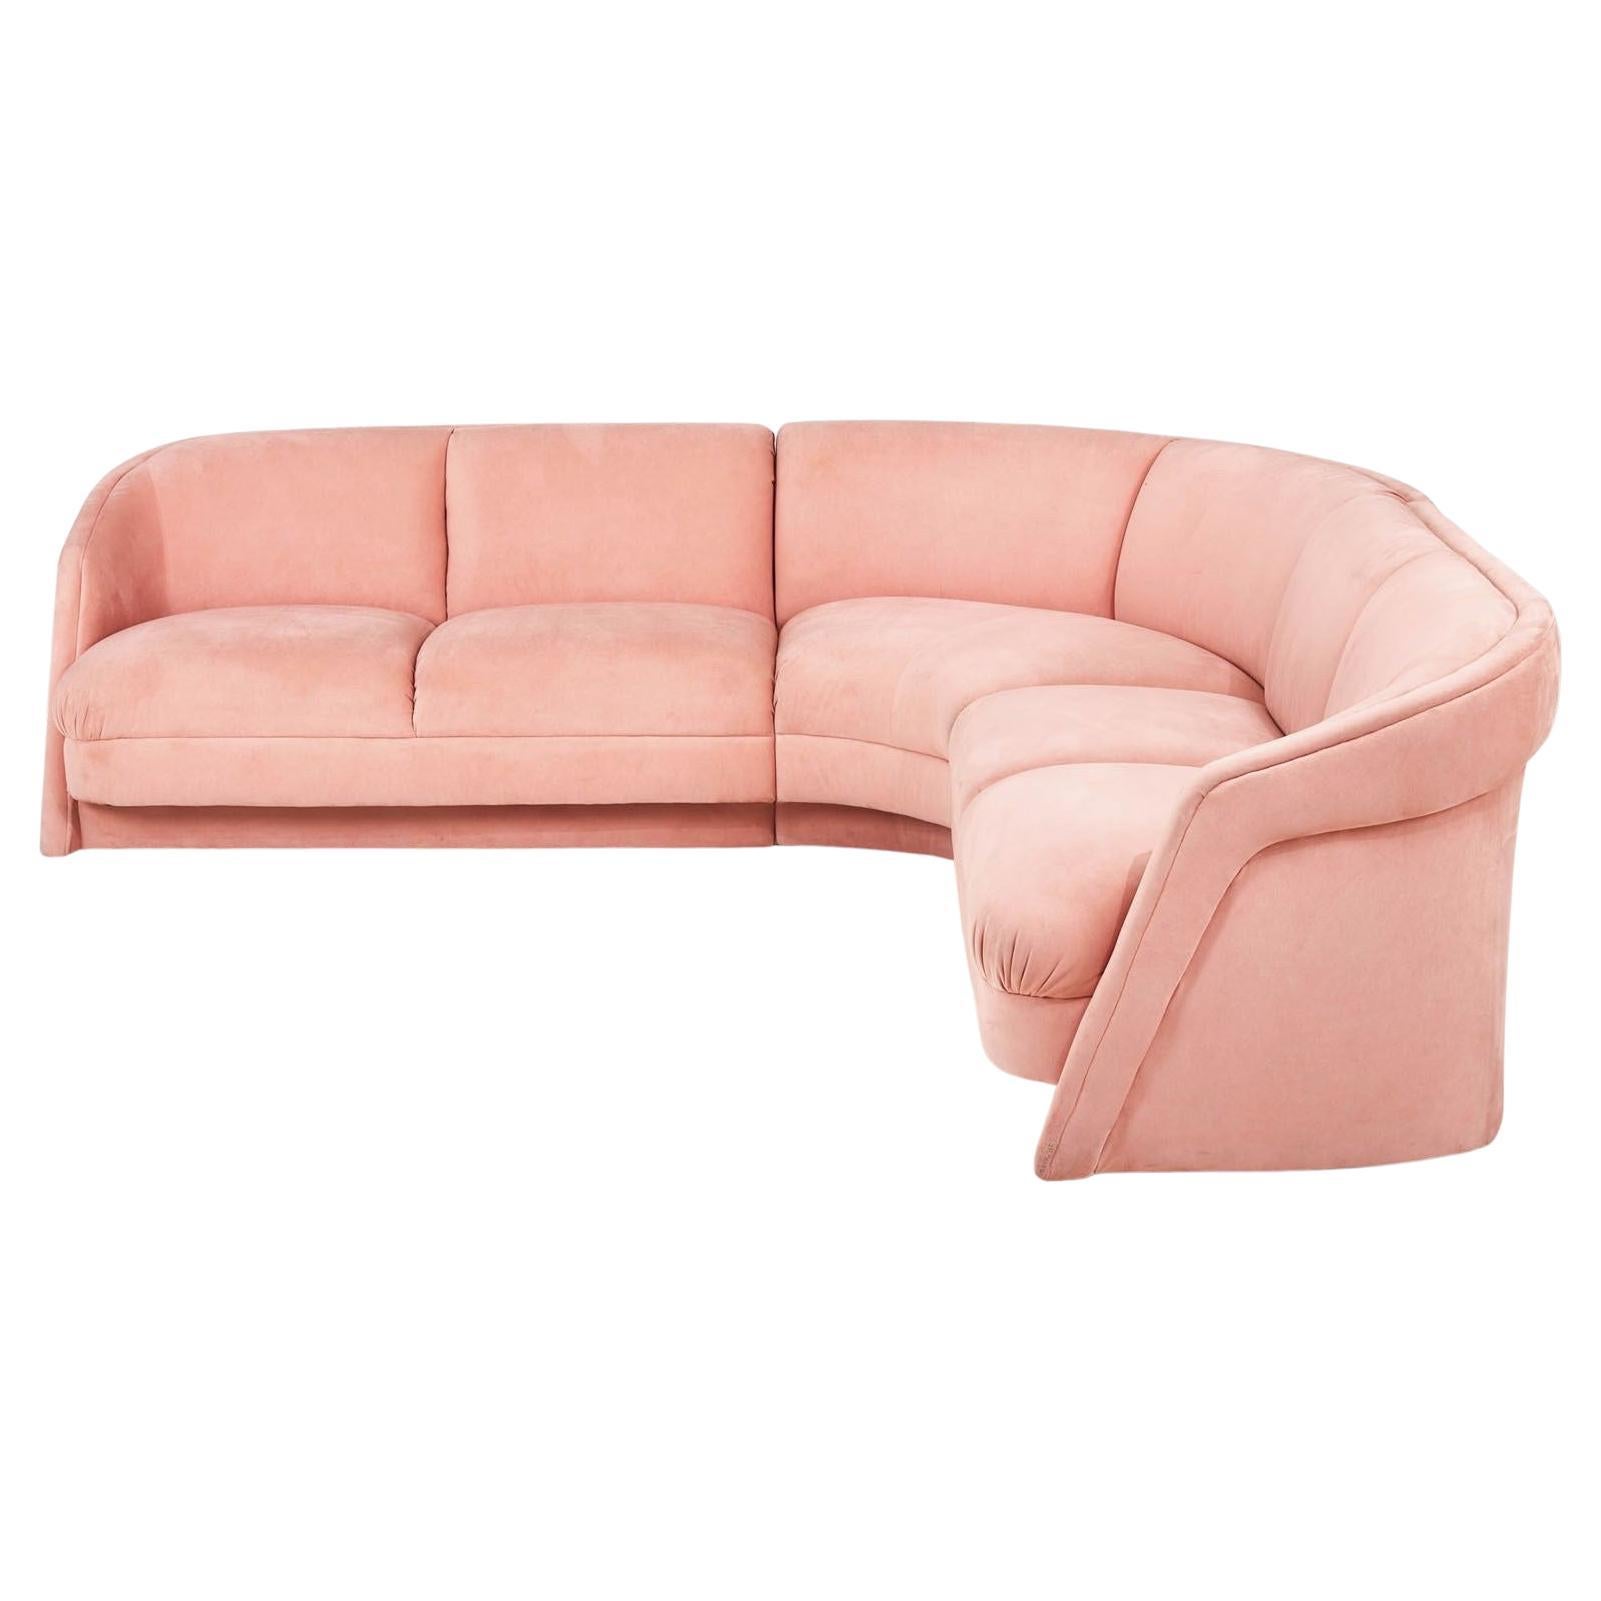 Pink Postmodern Sectional Sofa, Style of Milo Baughman for Thayer-Coggin, 1980 For Sale